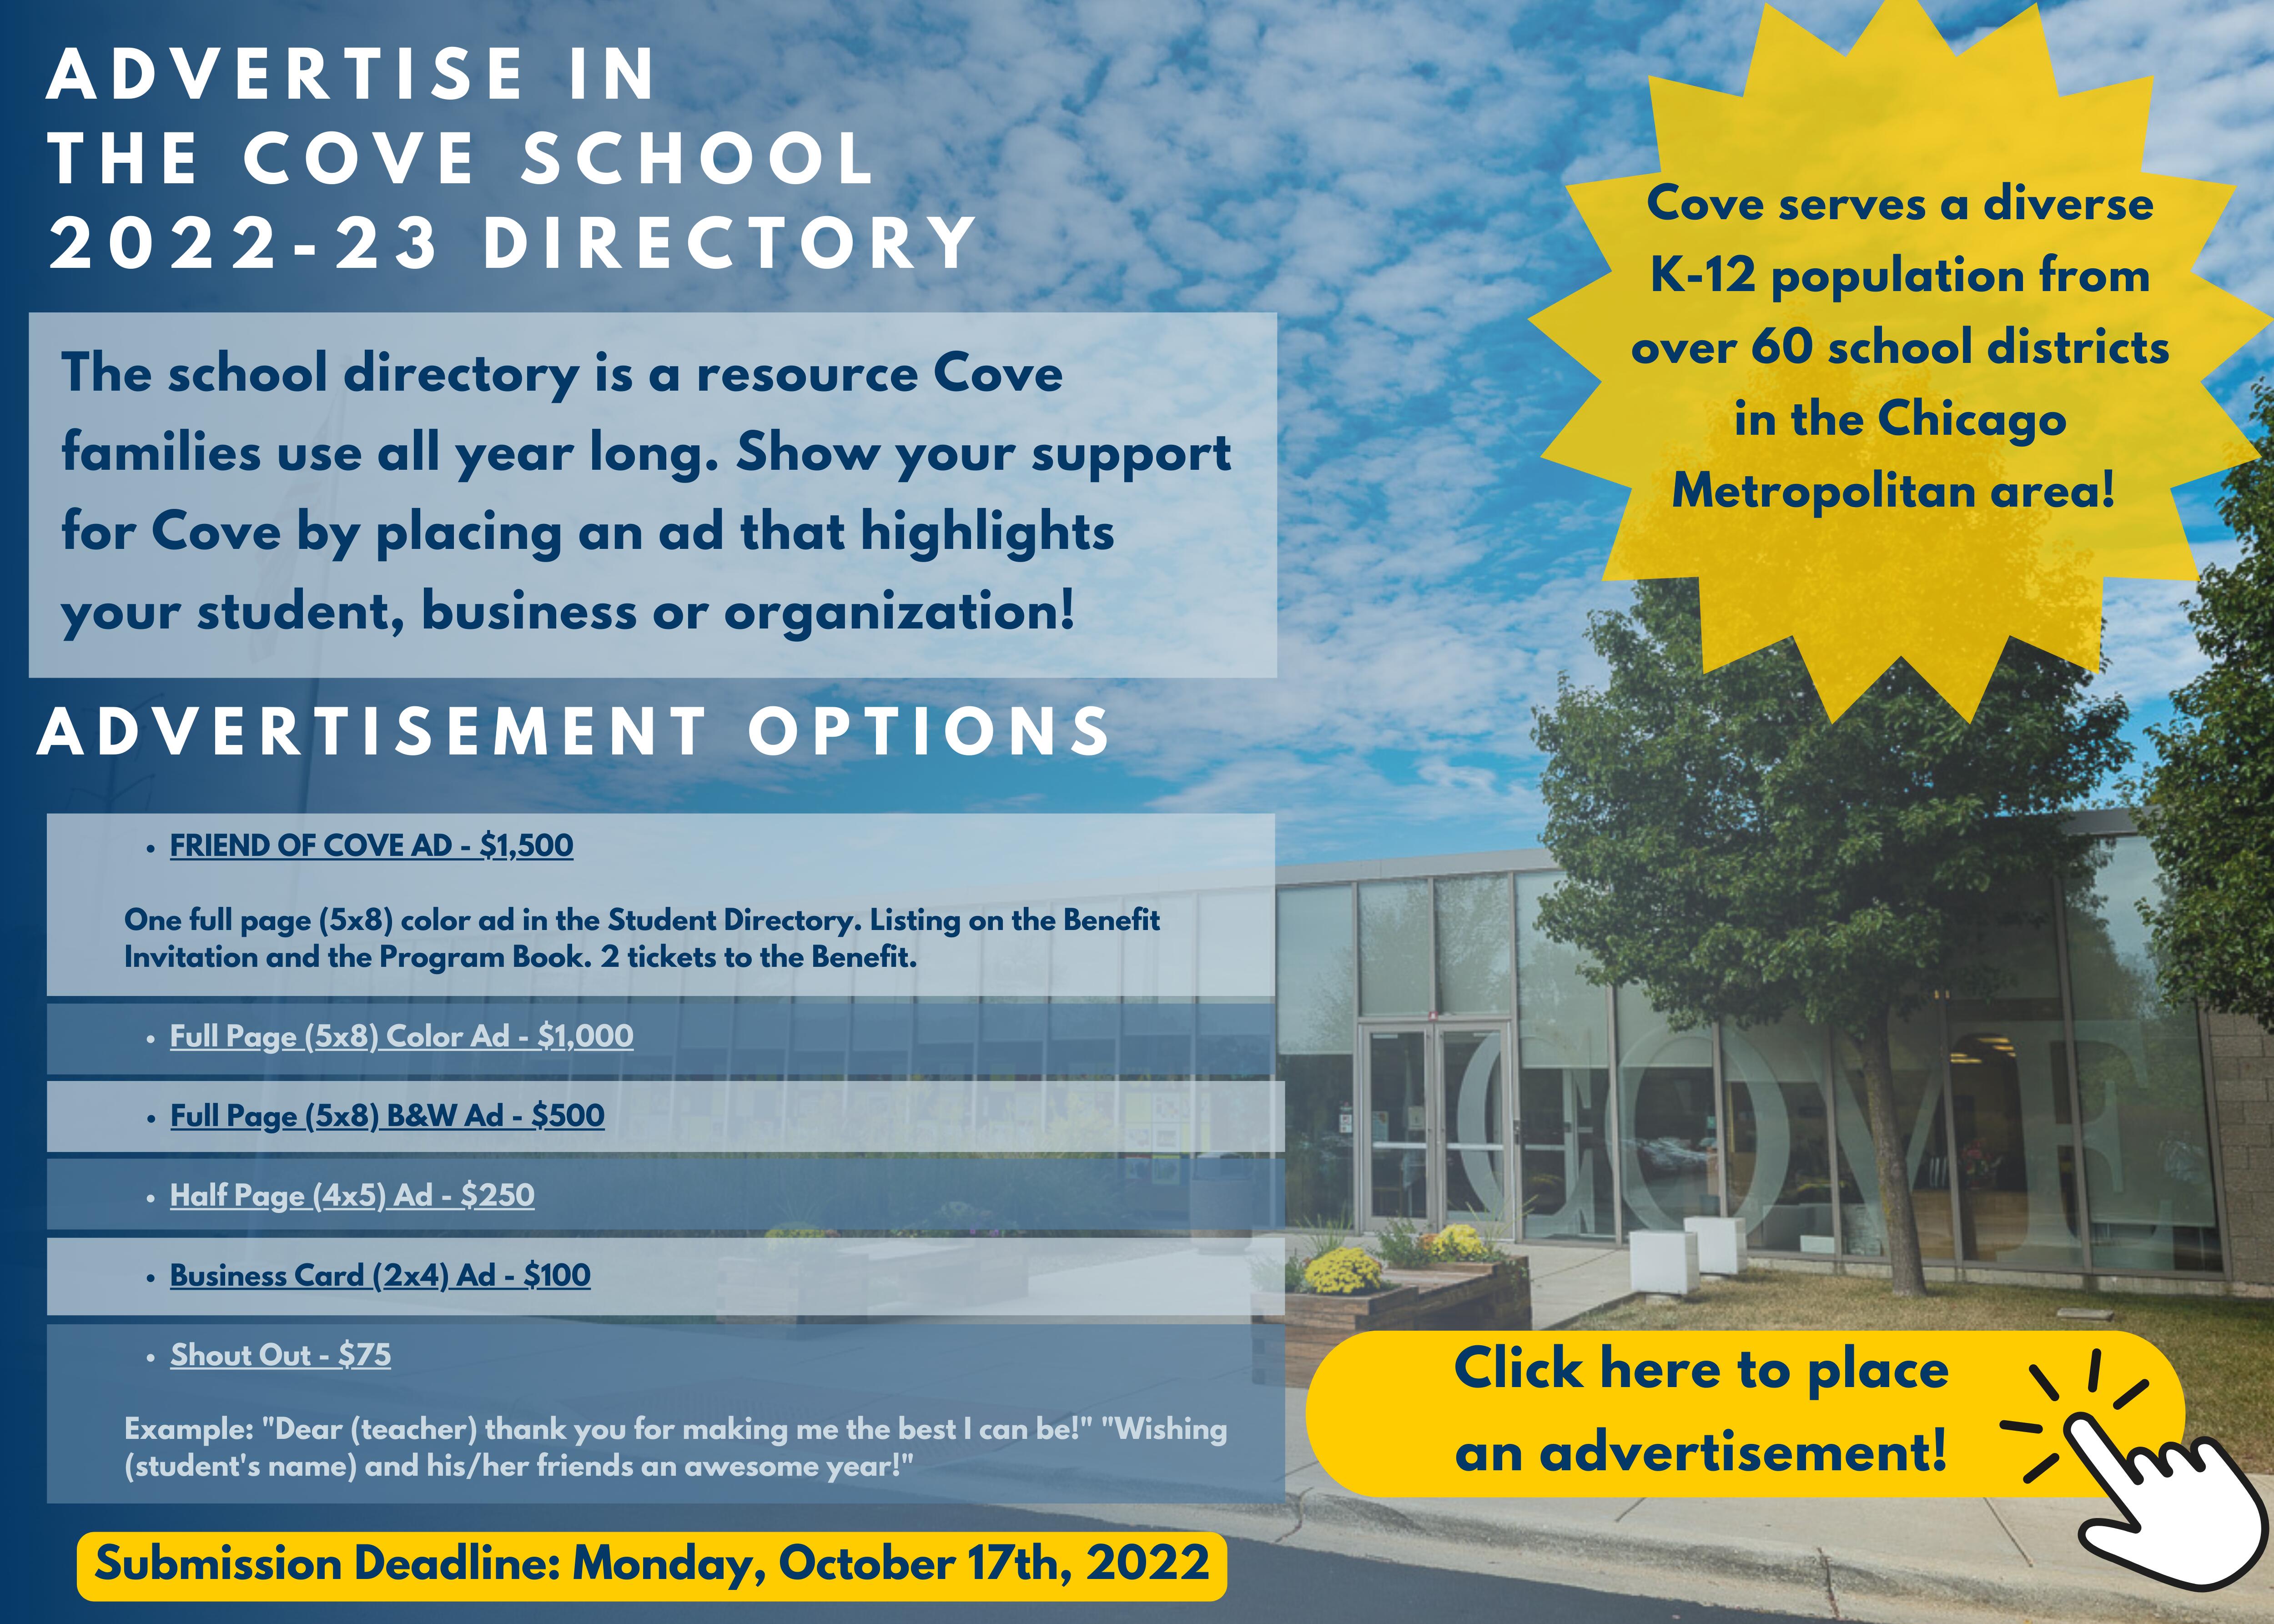 Advertise in the 2022-23 School Directory